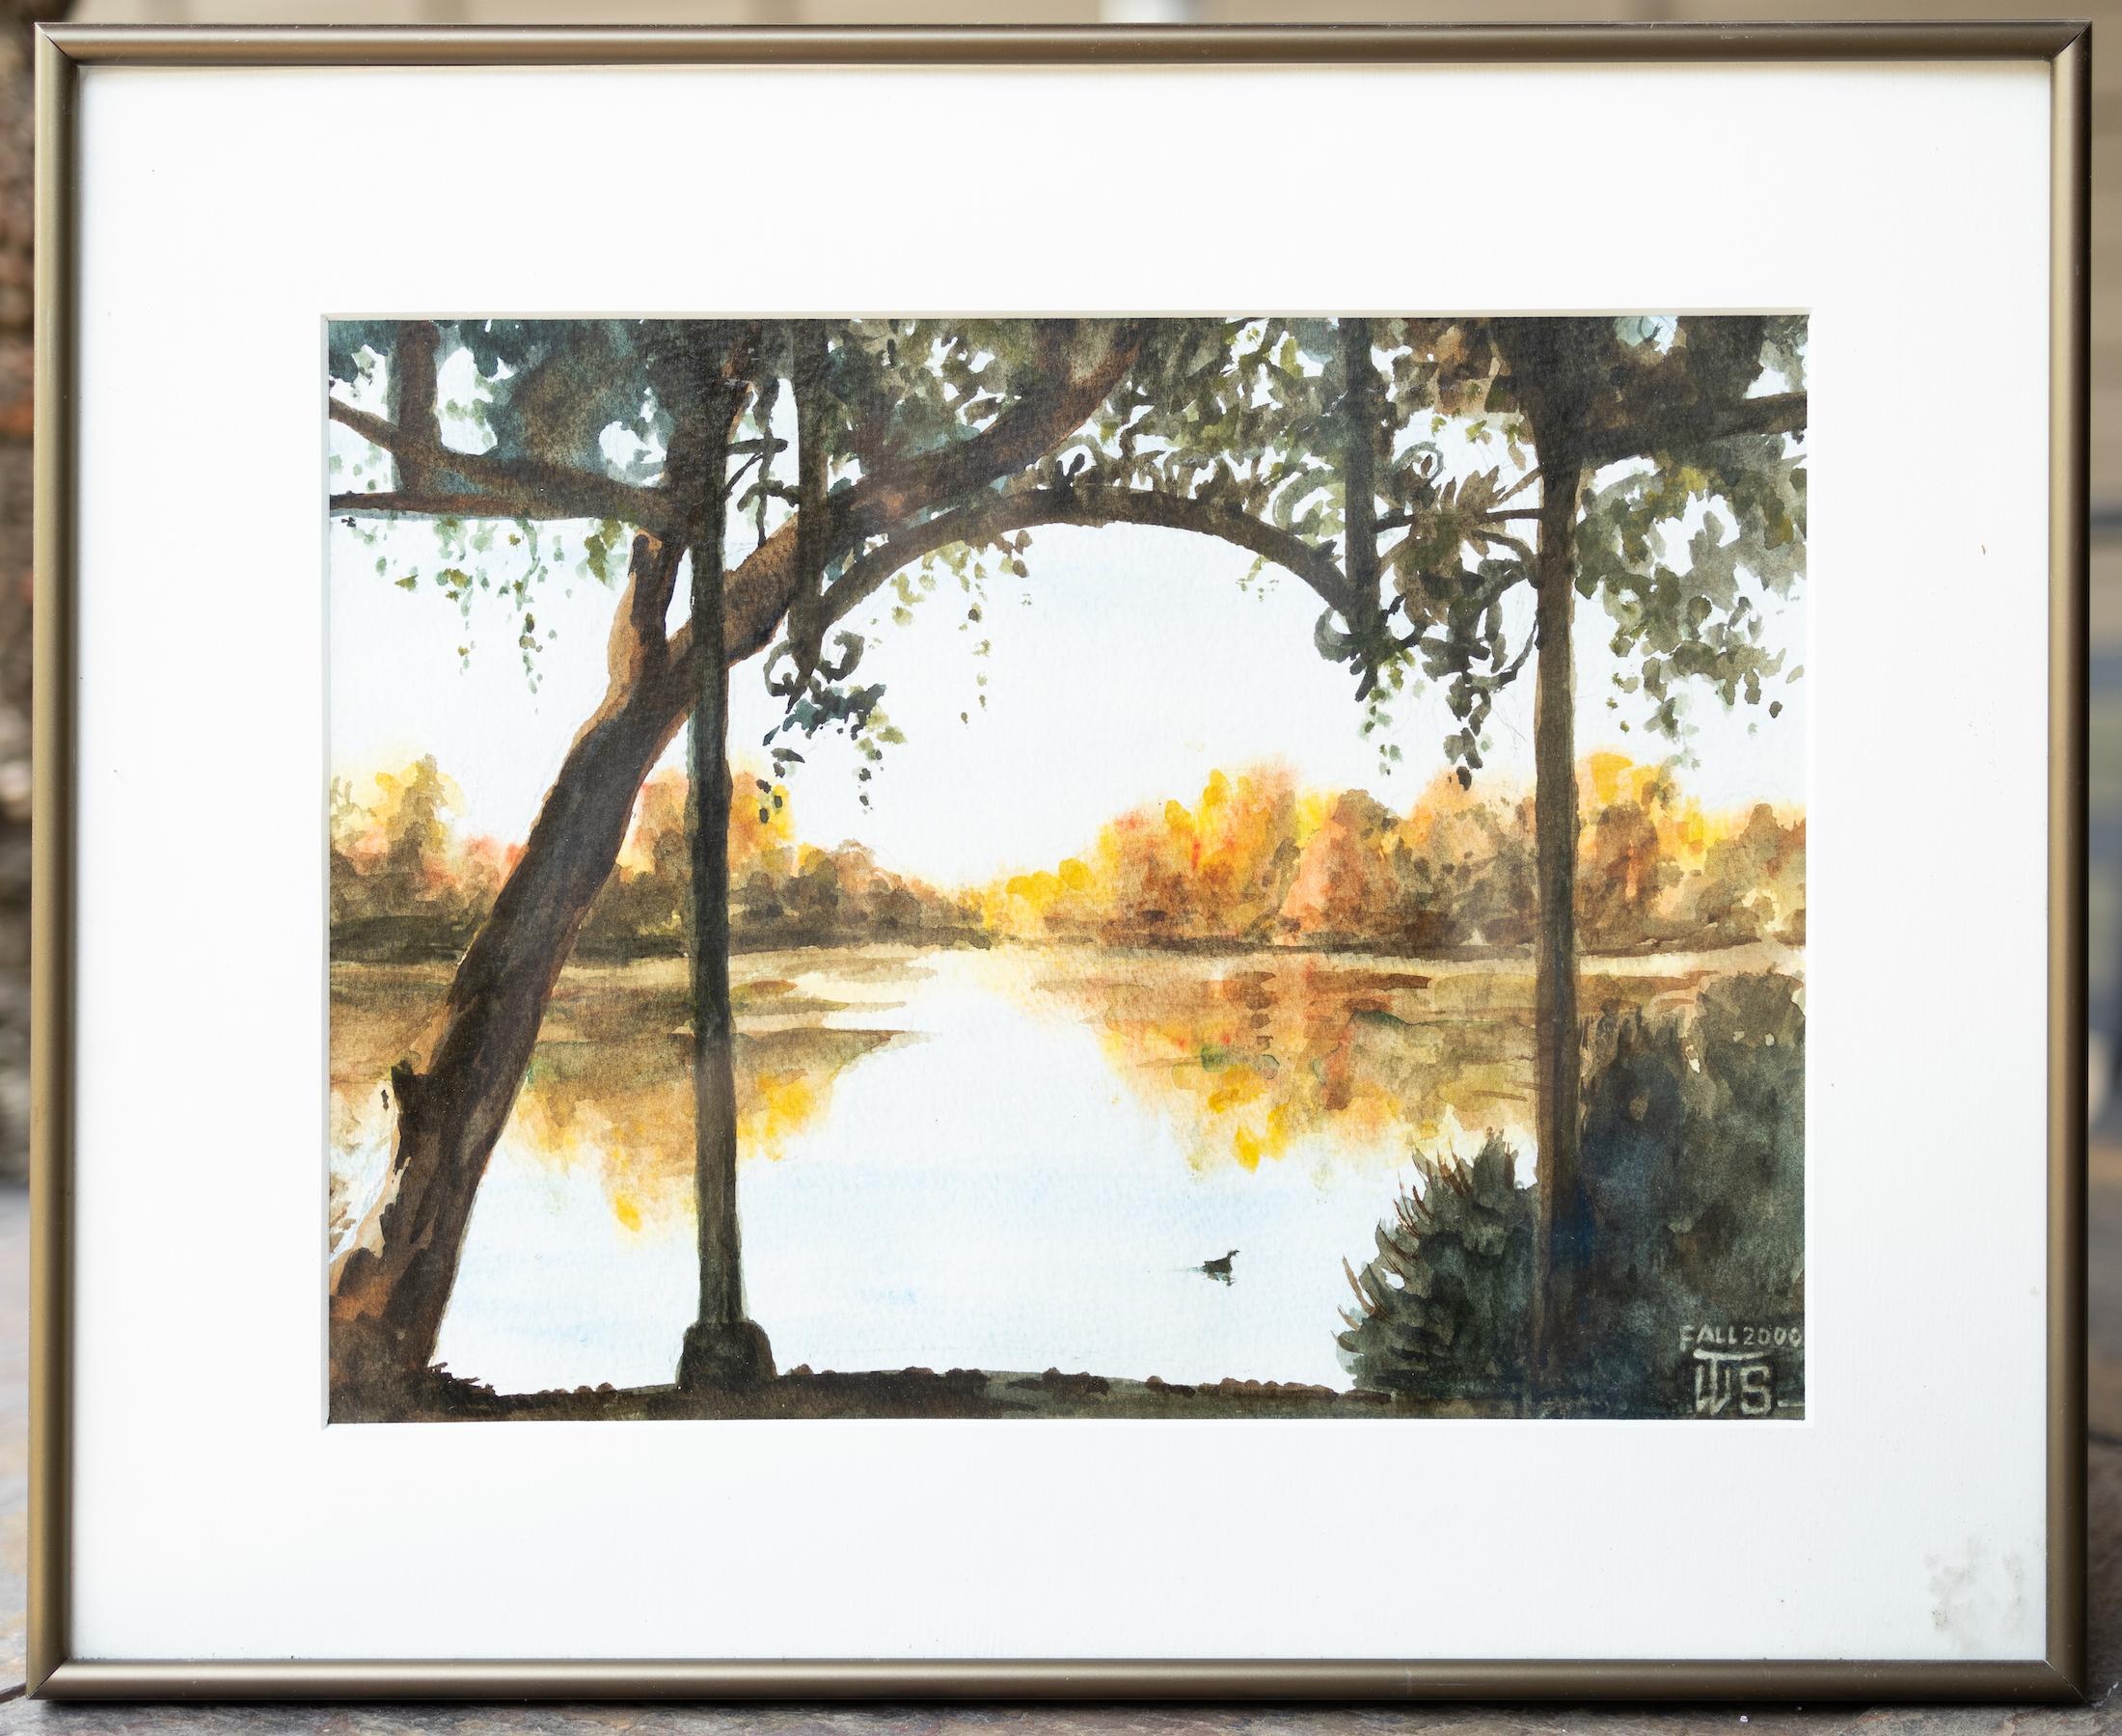 Lakeview with an Archway - Art by Tom Shefelman